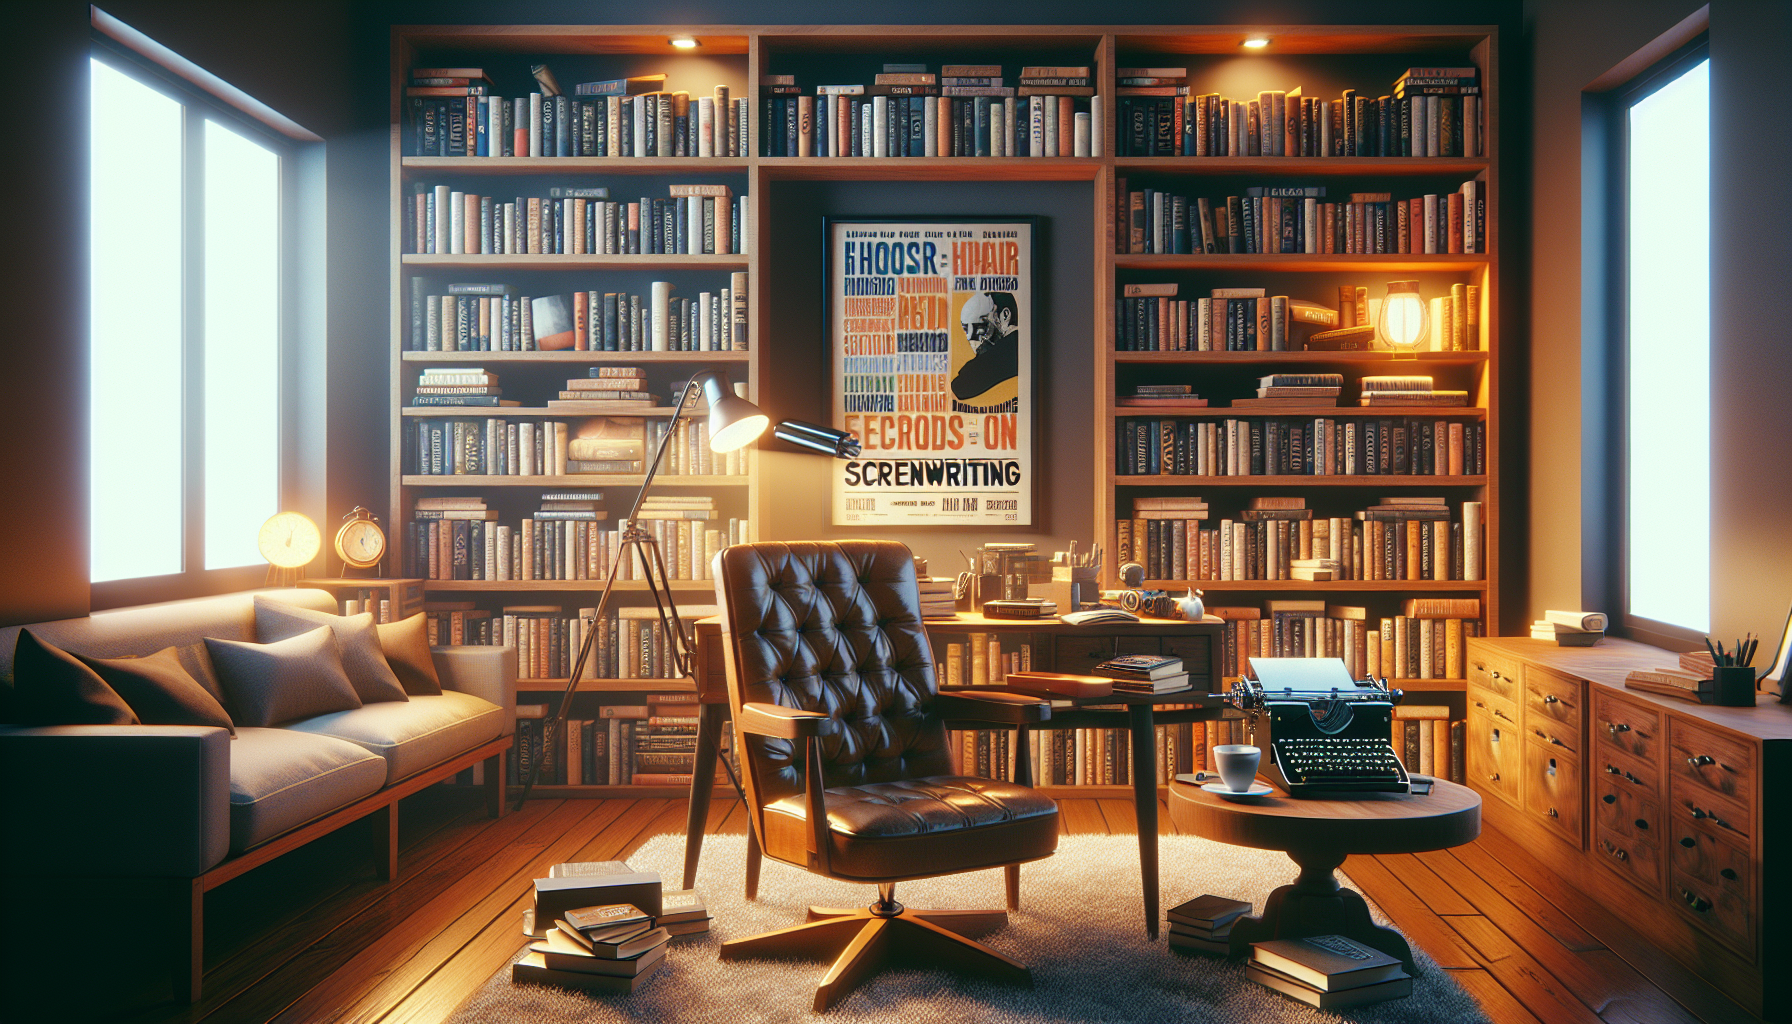 A cozy, inviting home library filled with a variety of thick books on screenwriting, a vintage typewriter on a wooden desk, warm lighting highlighting a comfortable reading chair and a cup of steaming